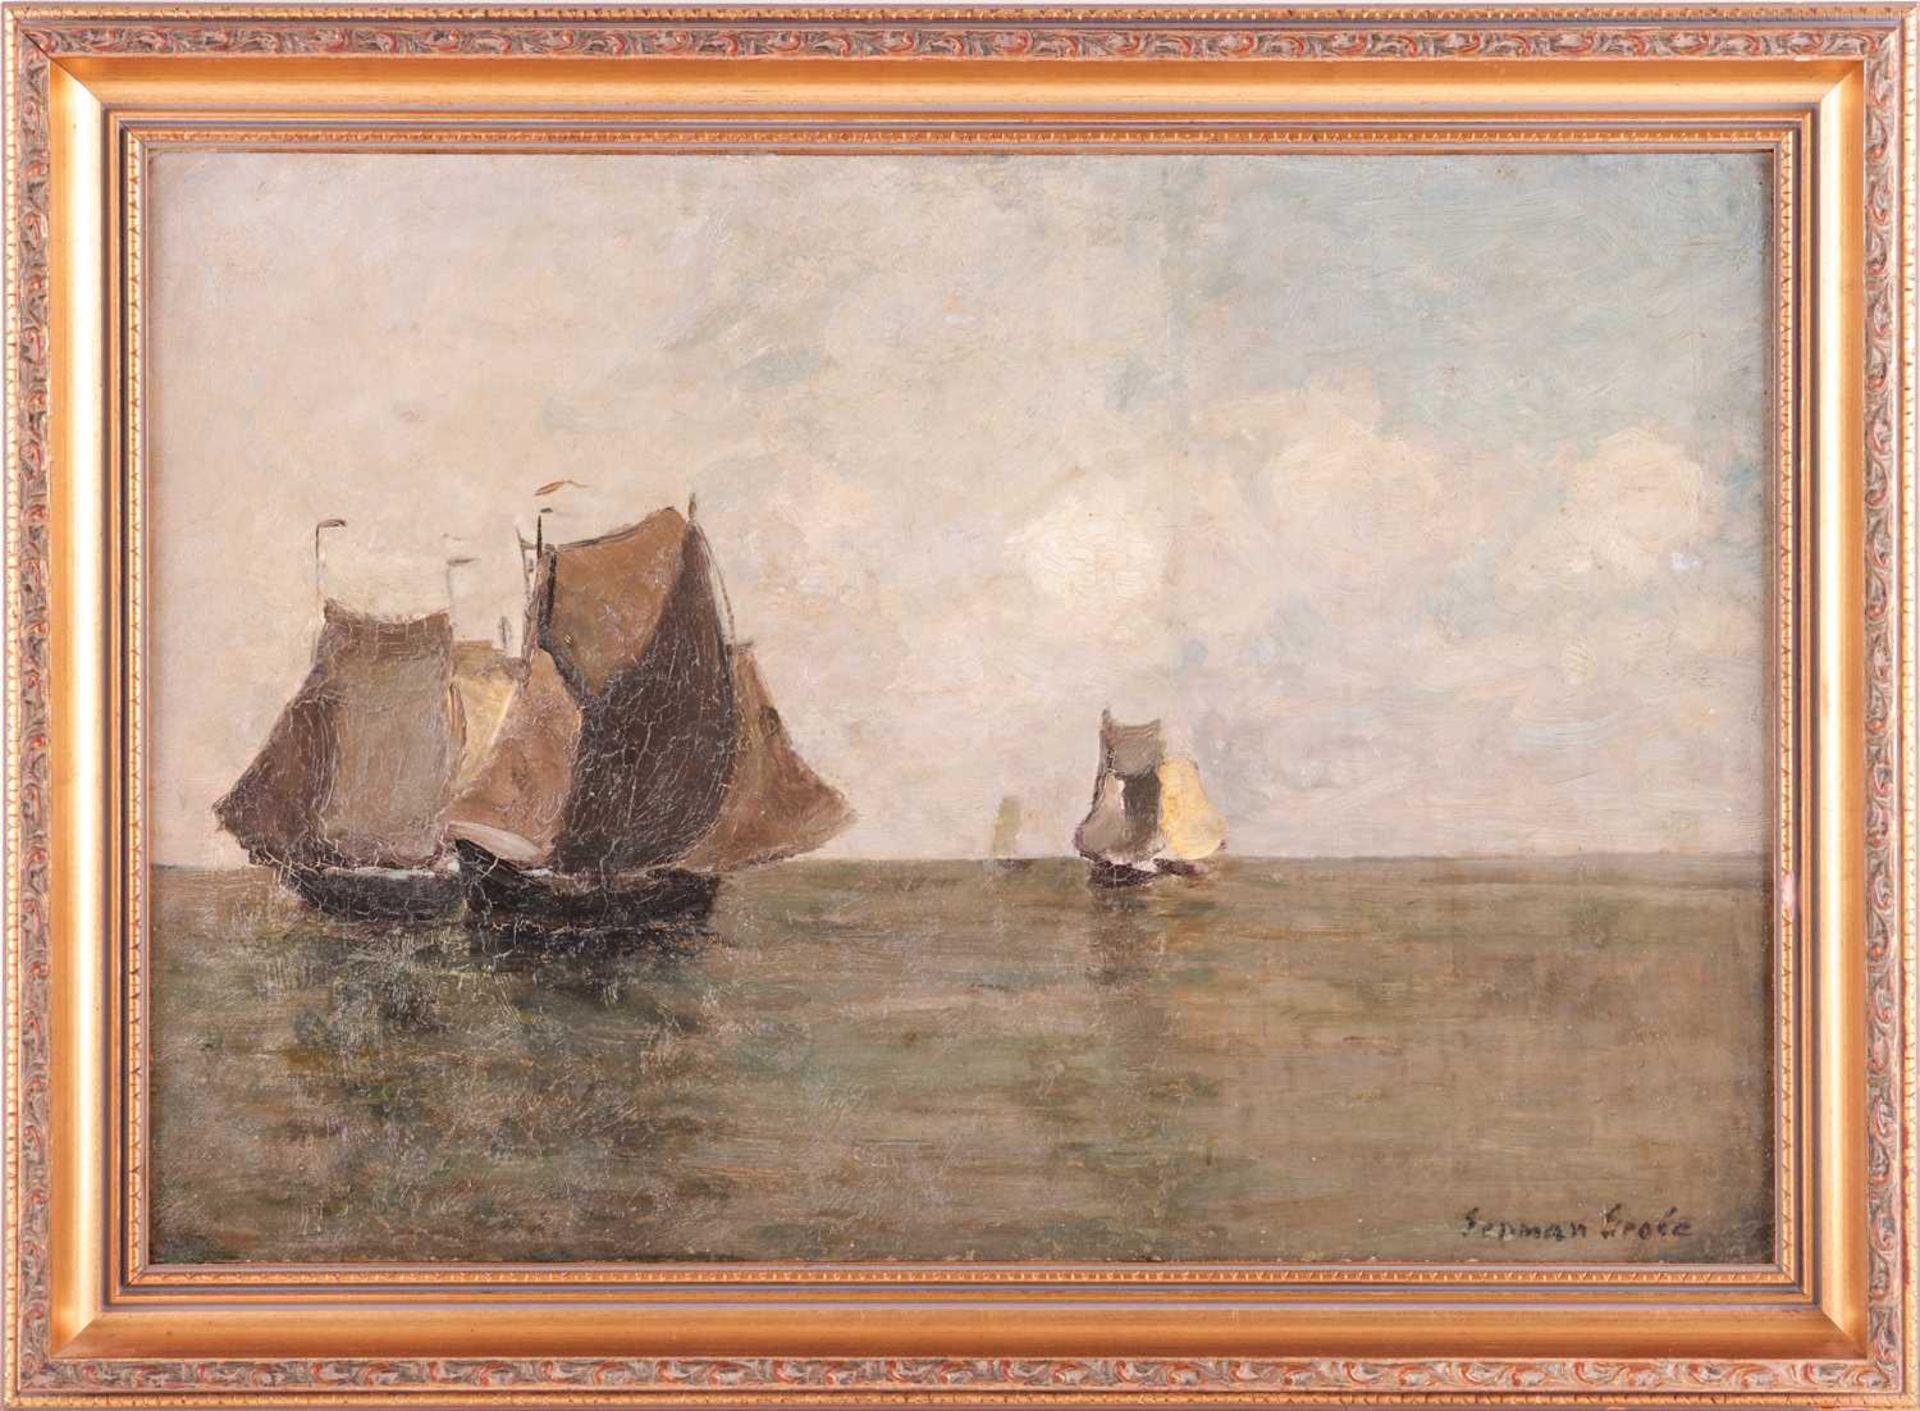 German Grobe (1857-1938), seascape with boats, oil on panel, signed to lower right corner, 32 cm x 4 - Image 2 of 7